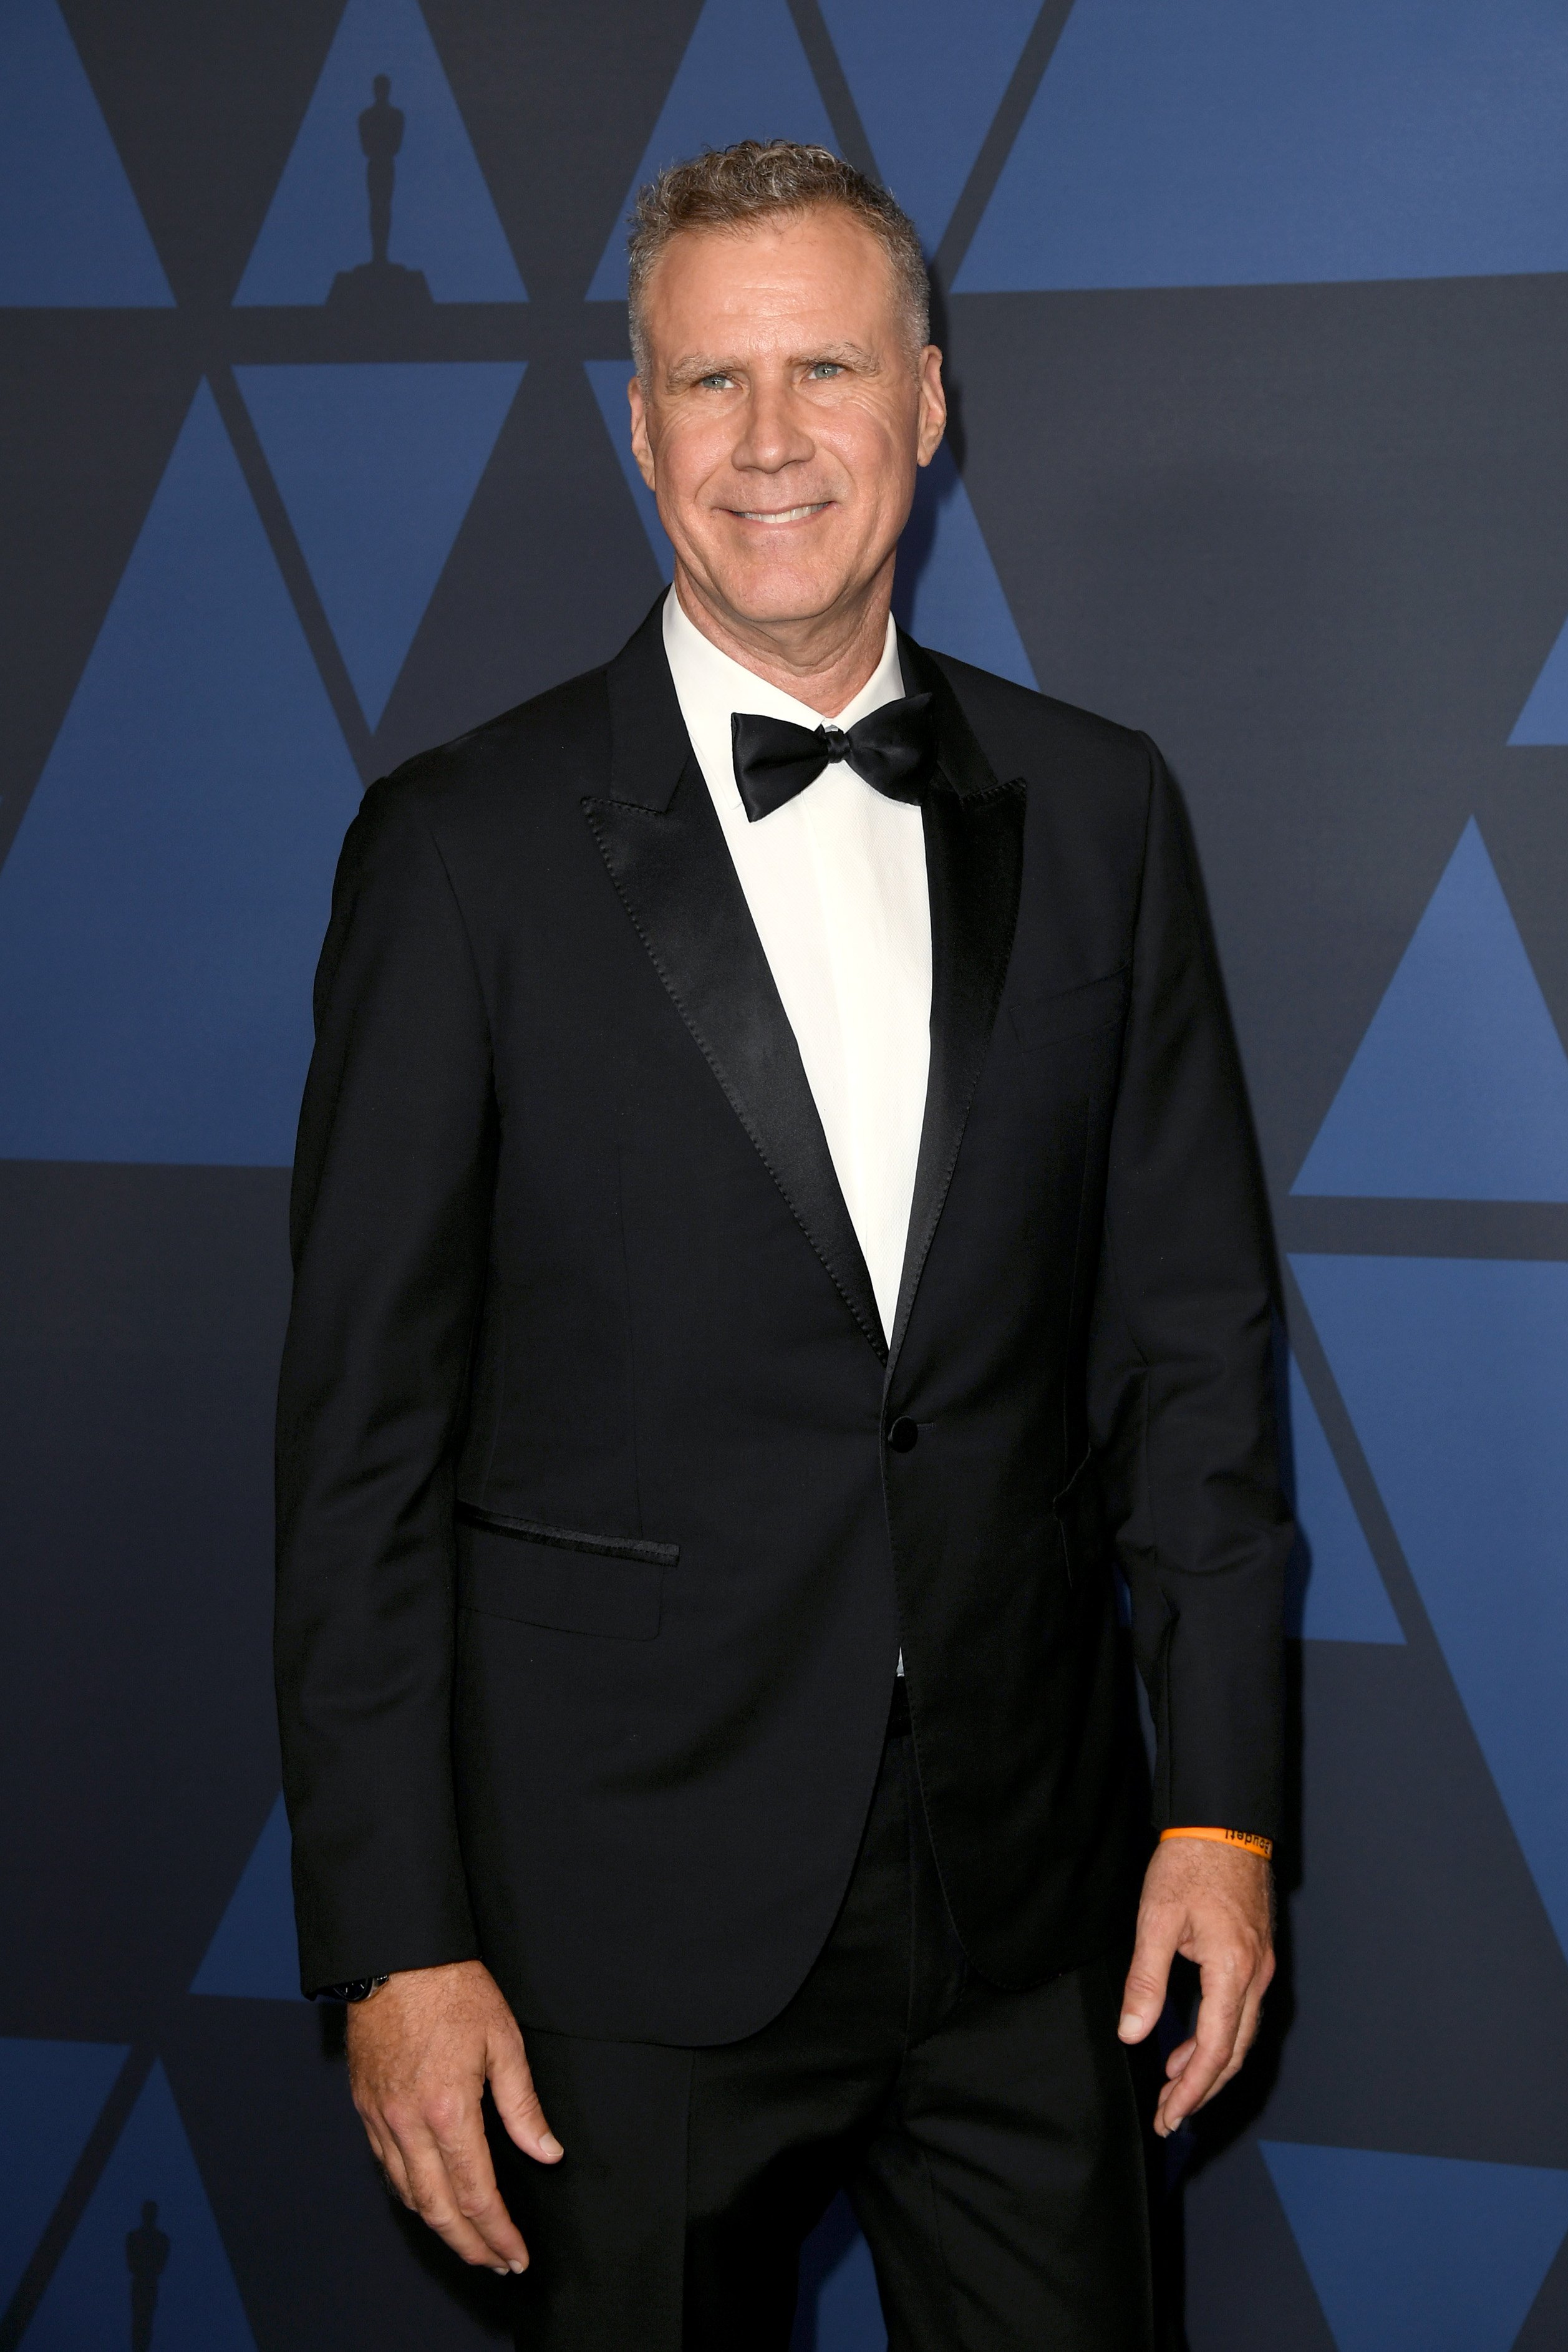 Will Ferrell attends the Academy of Motion Picture Arts And Sciences' 11th Annual Governors Awards at Hollywood & Highland Center on October 27, 2019, in Hollywood, California. | Source: Getty Images